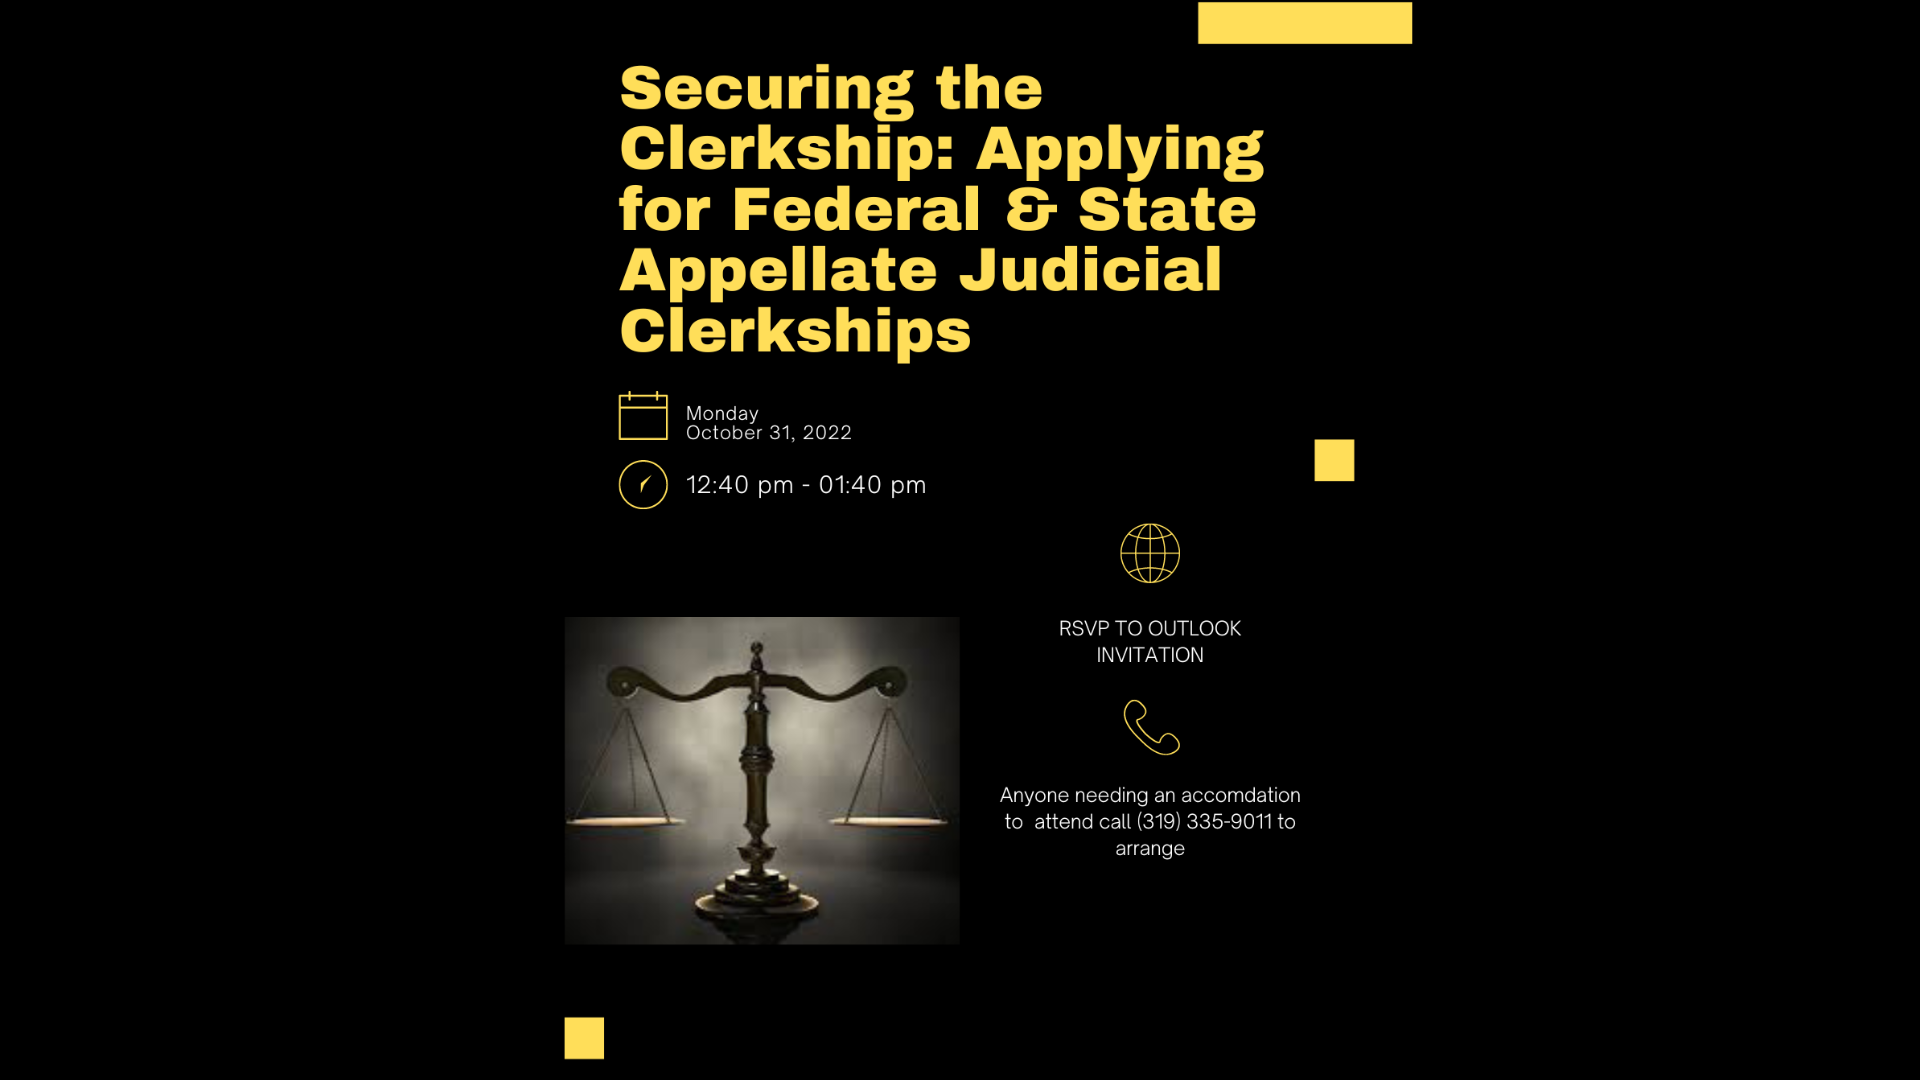  Securing the Clerkship: Applying for Federal and State Appellate Judicial Clerkships        Date: Monday, October 31, 2022 @ 12:40 p.m.        RSVP To Outlook Invitation